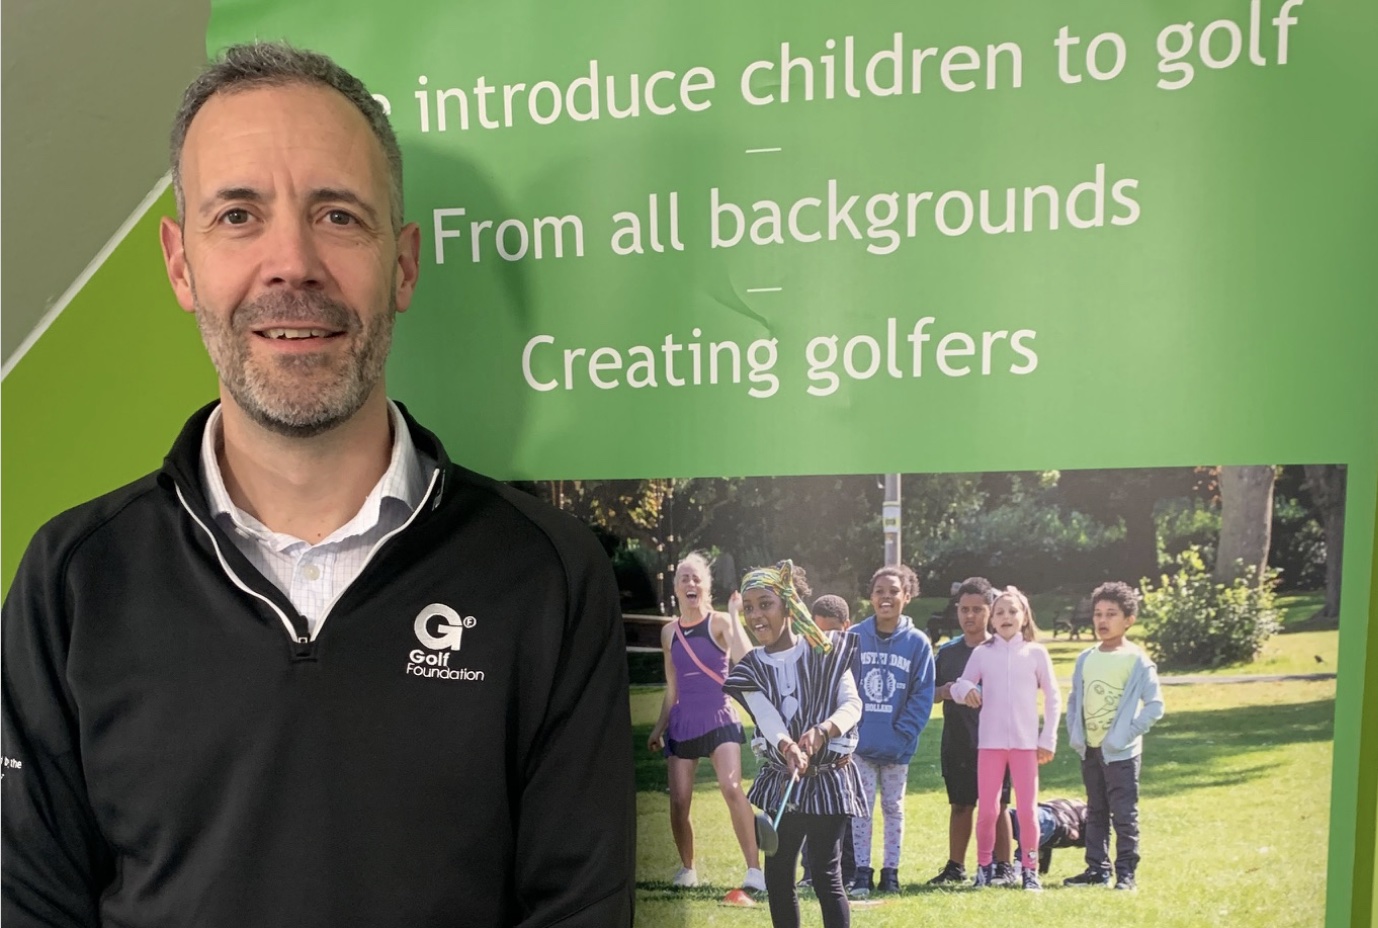 The Golf Foundation’s new Chair Steven Day